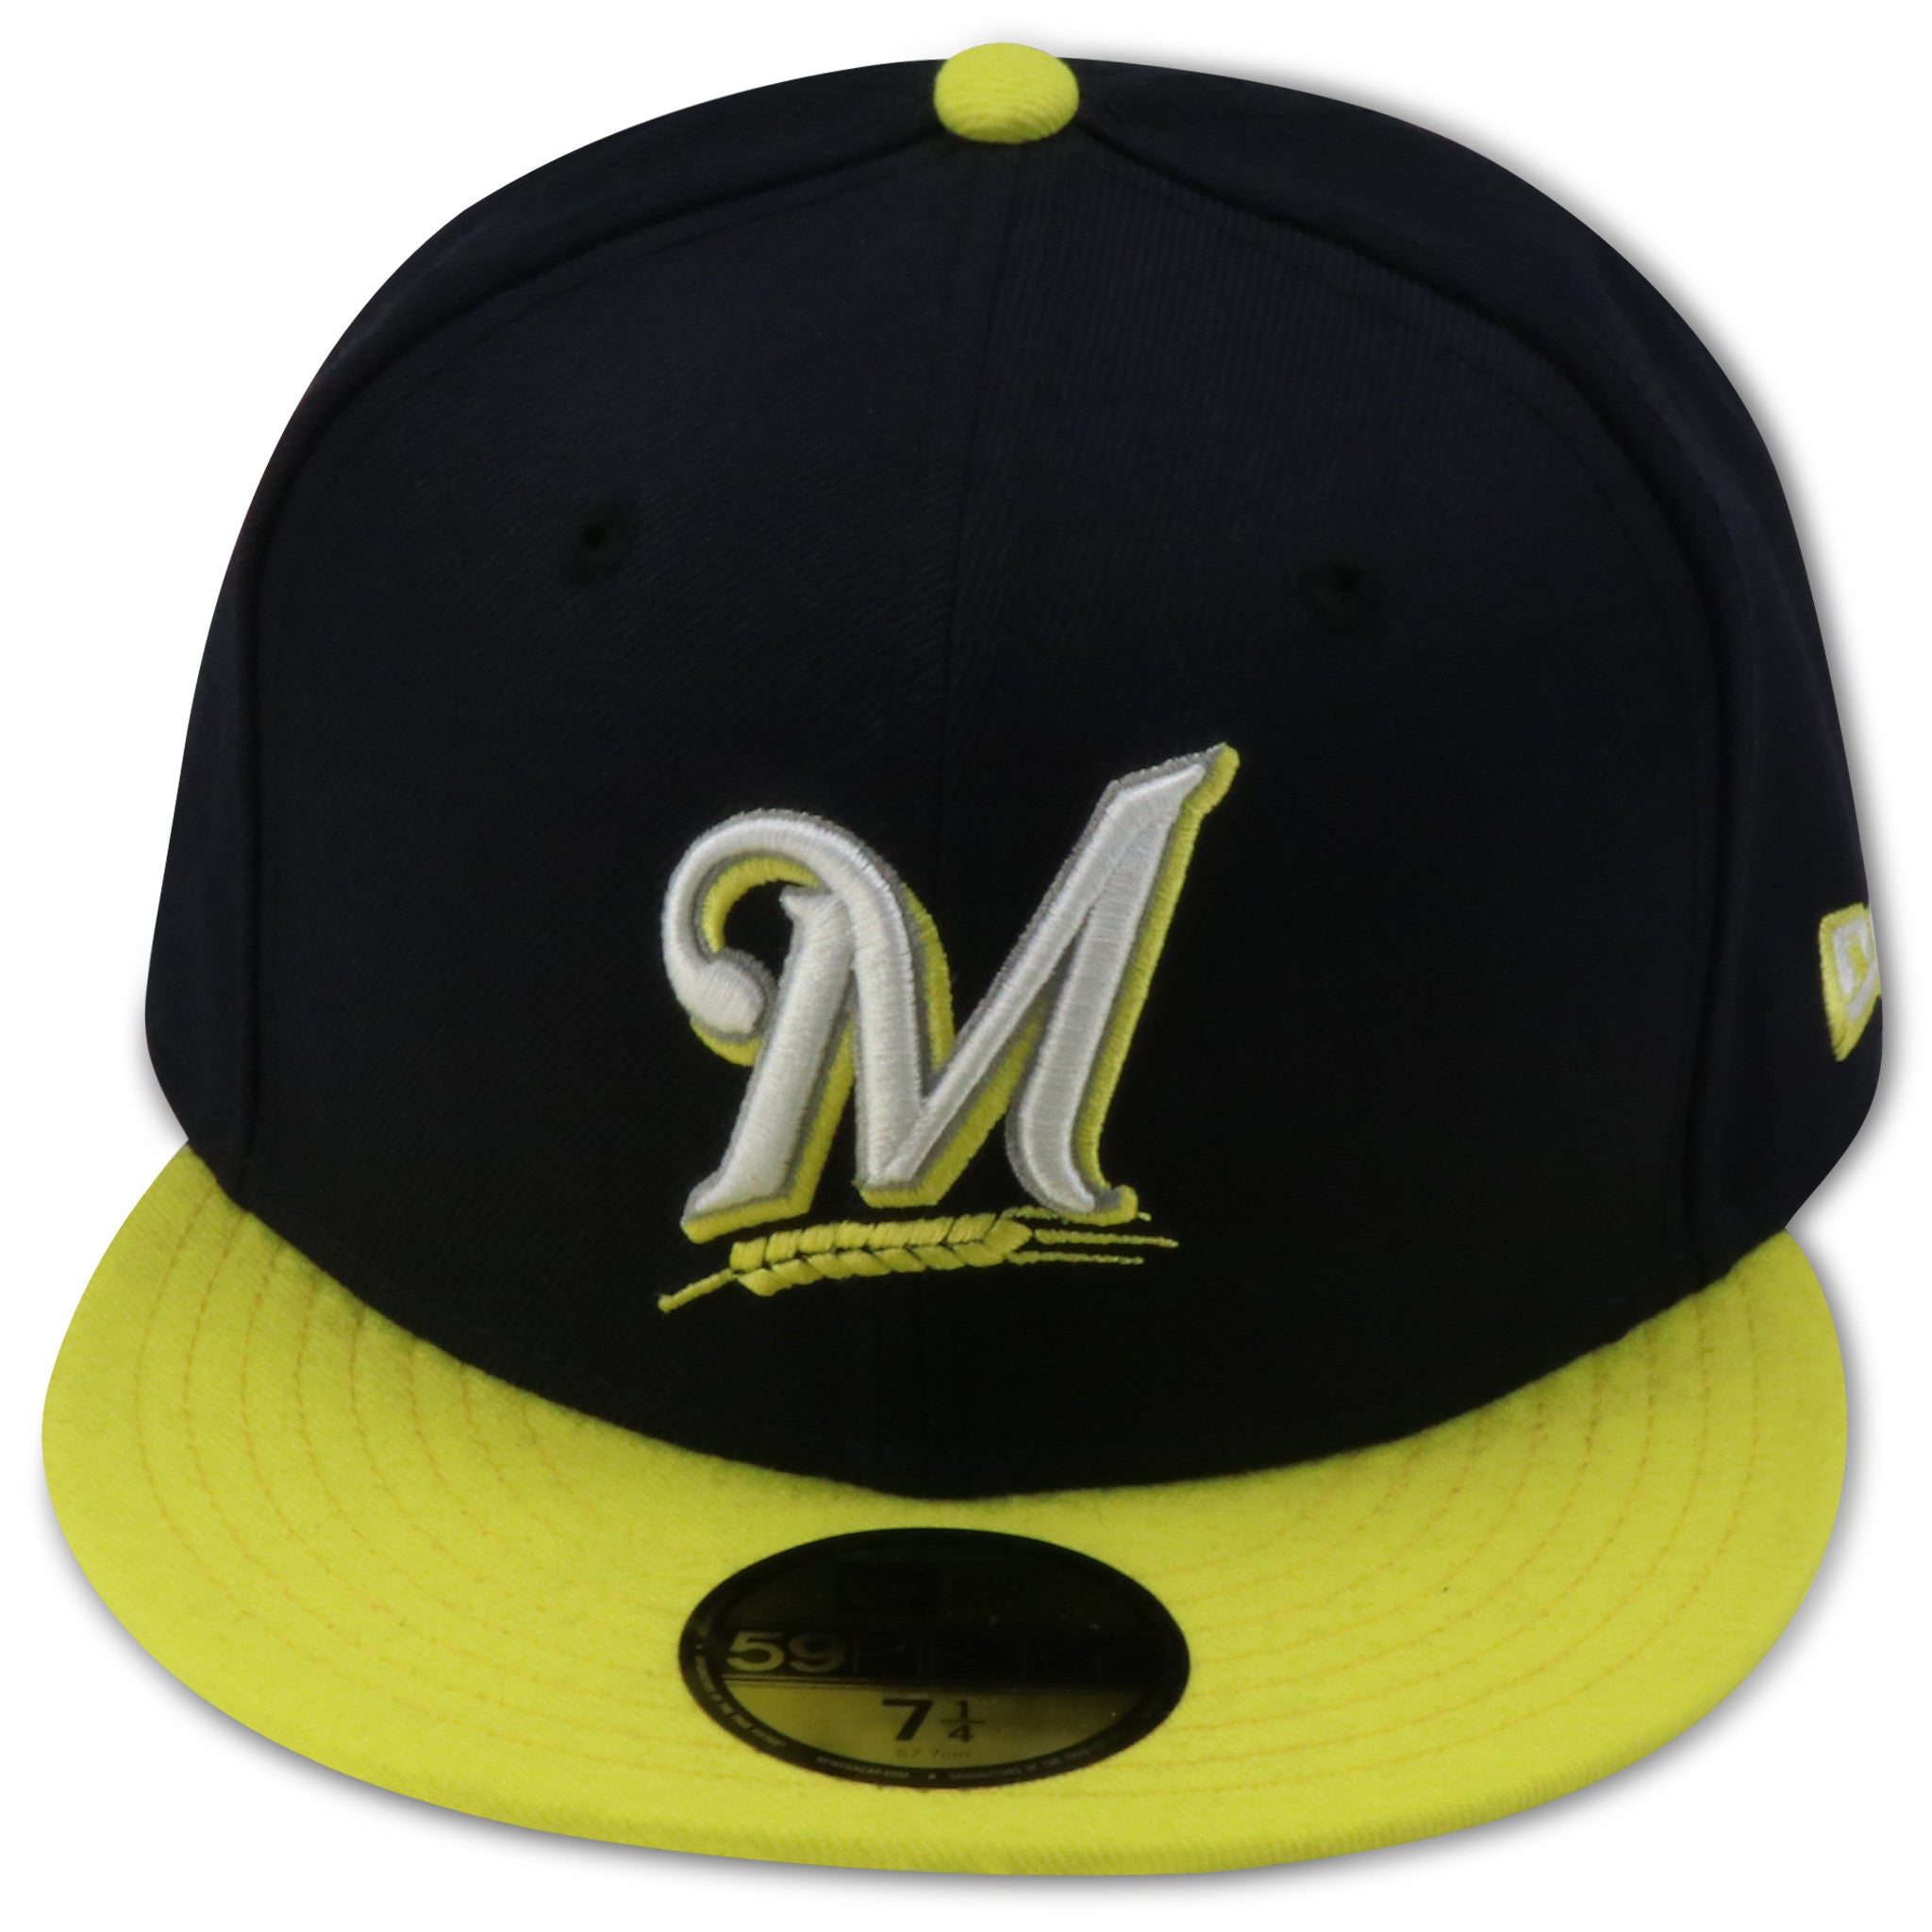 MILWAUKEE BREWERS NEW ERA 59FIFTY FITTED